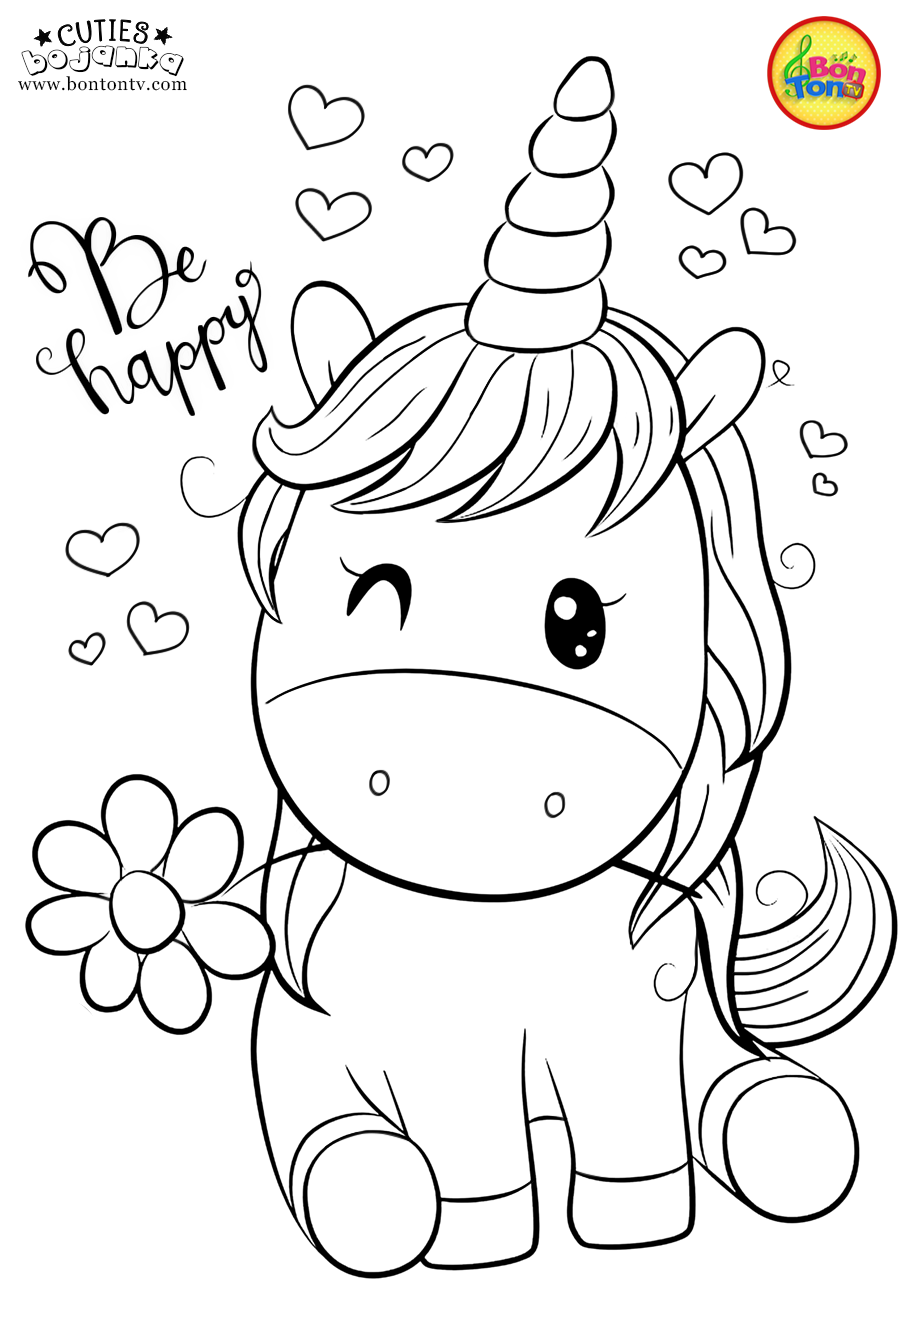 Cuties Coloring Pages For Kids - Free Preschool Printables